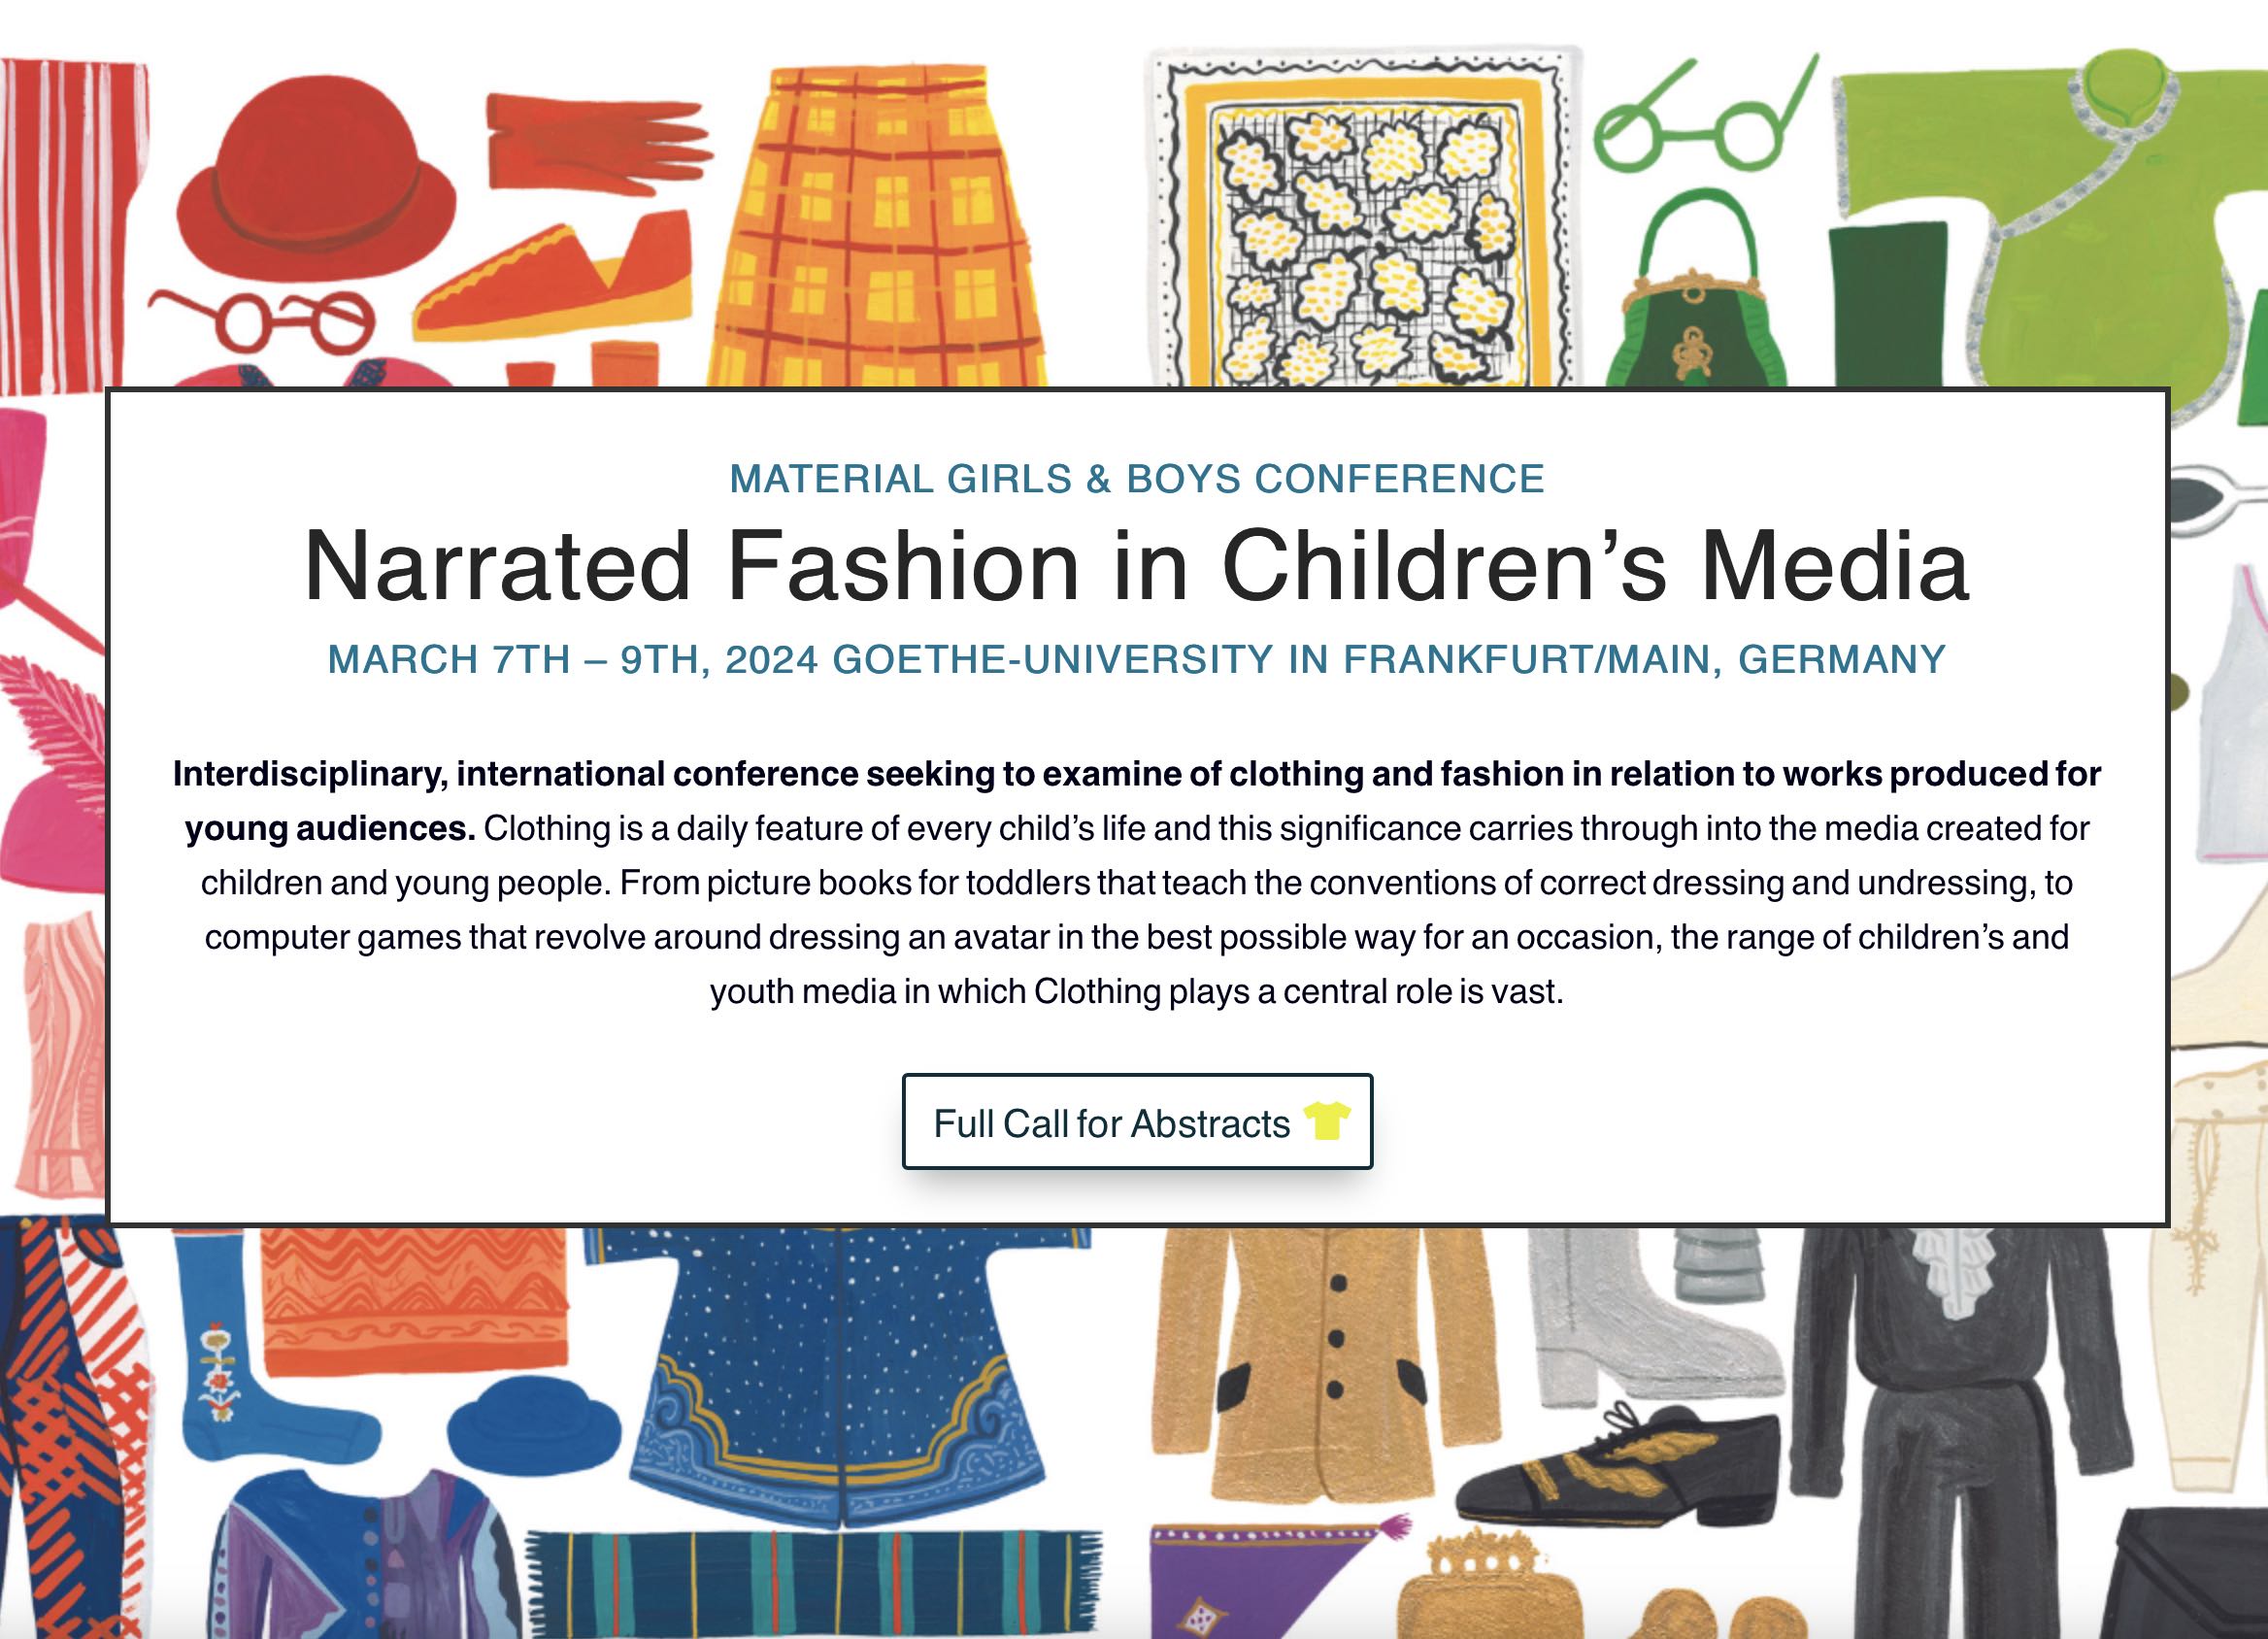 CfP: Material Girls & Boys: Narrated Fashion in Children’s Media. (March 7th - 9th, 2024 Goethe-University in Frankfurt/Main, Germany)